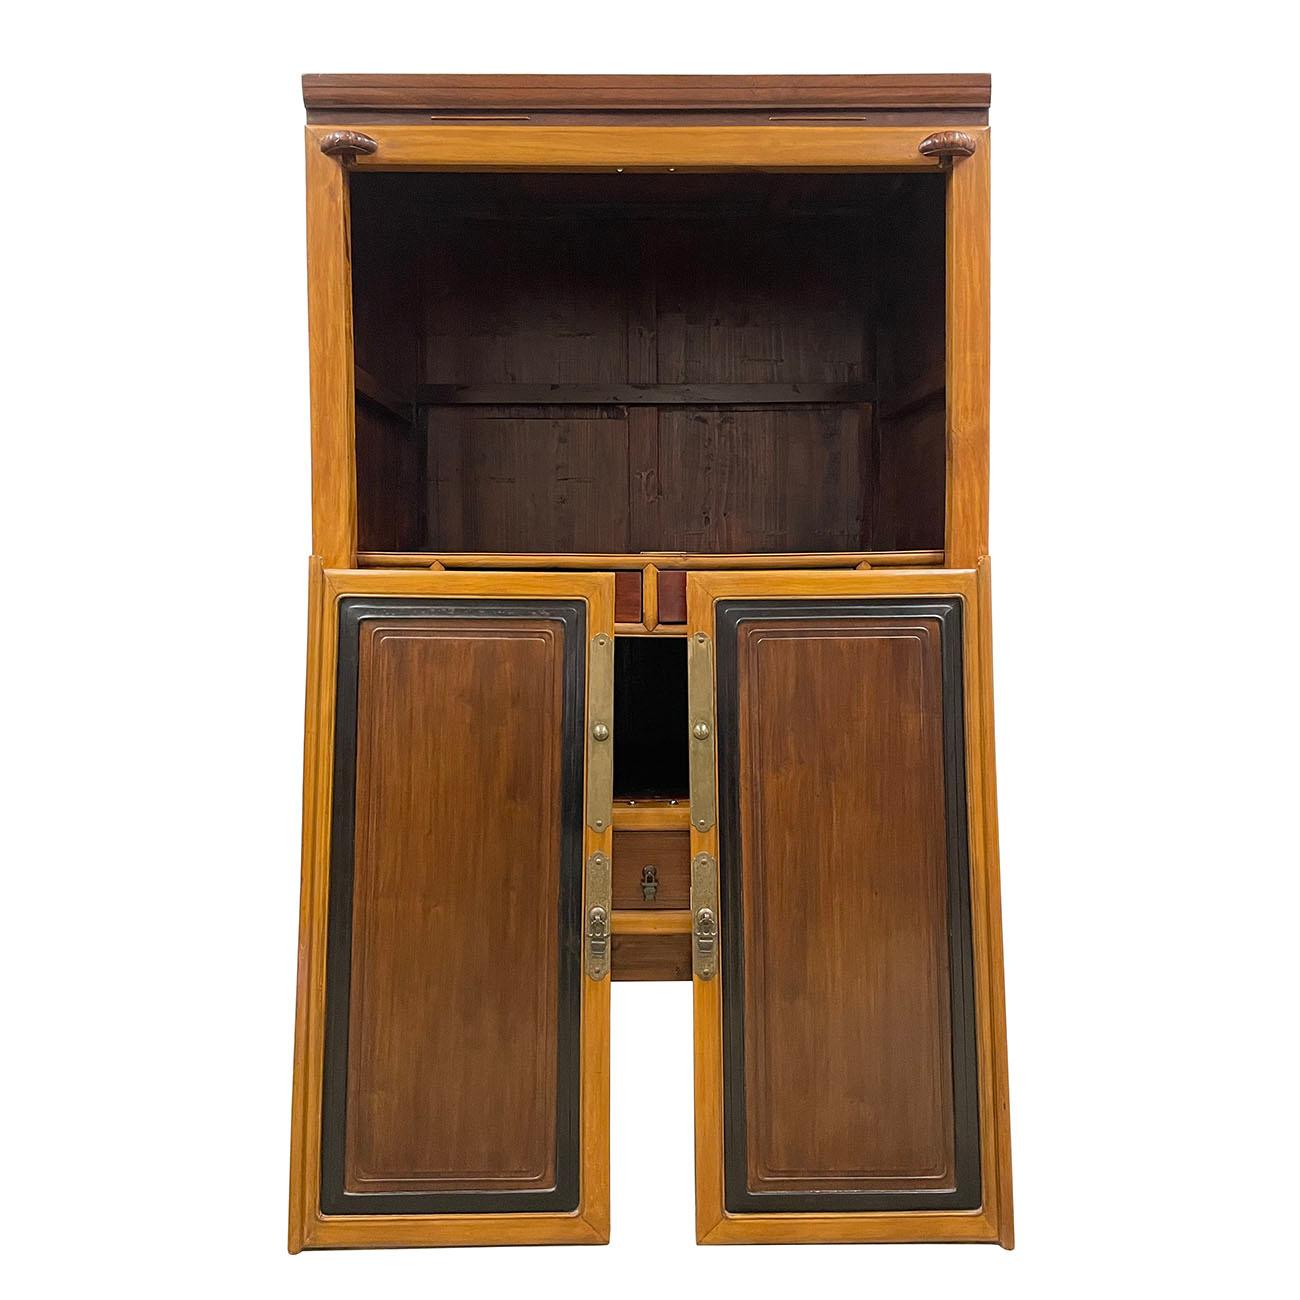 19th Century Antique Chinese NingBo TV Cabinet, Armoire, Wardrobe In Good Condition For Sale In Pomona, CA